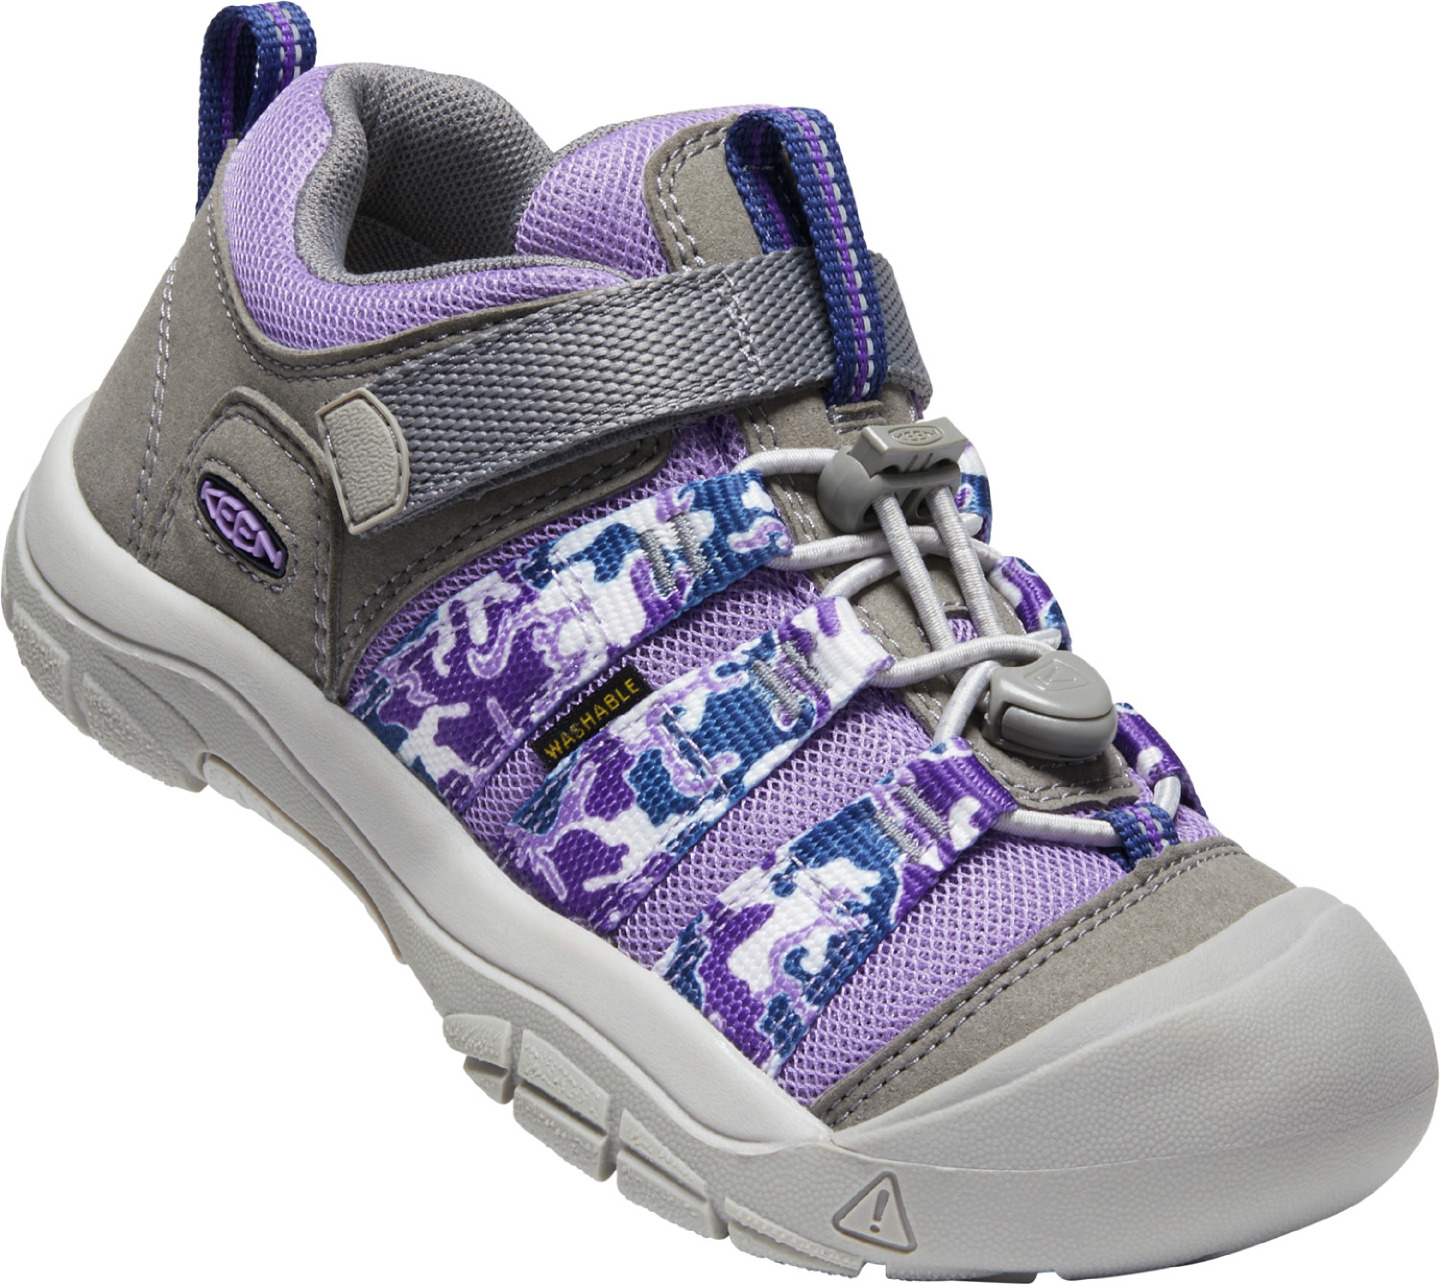 Boty Keen NEWPORT H2SHO YOUTH chalk violet/drizzle US 5